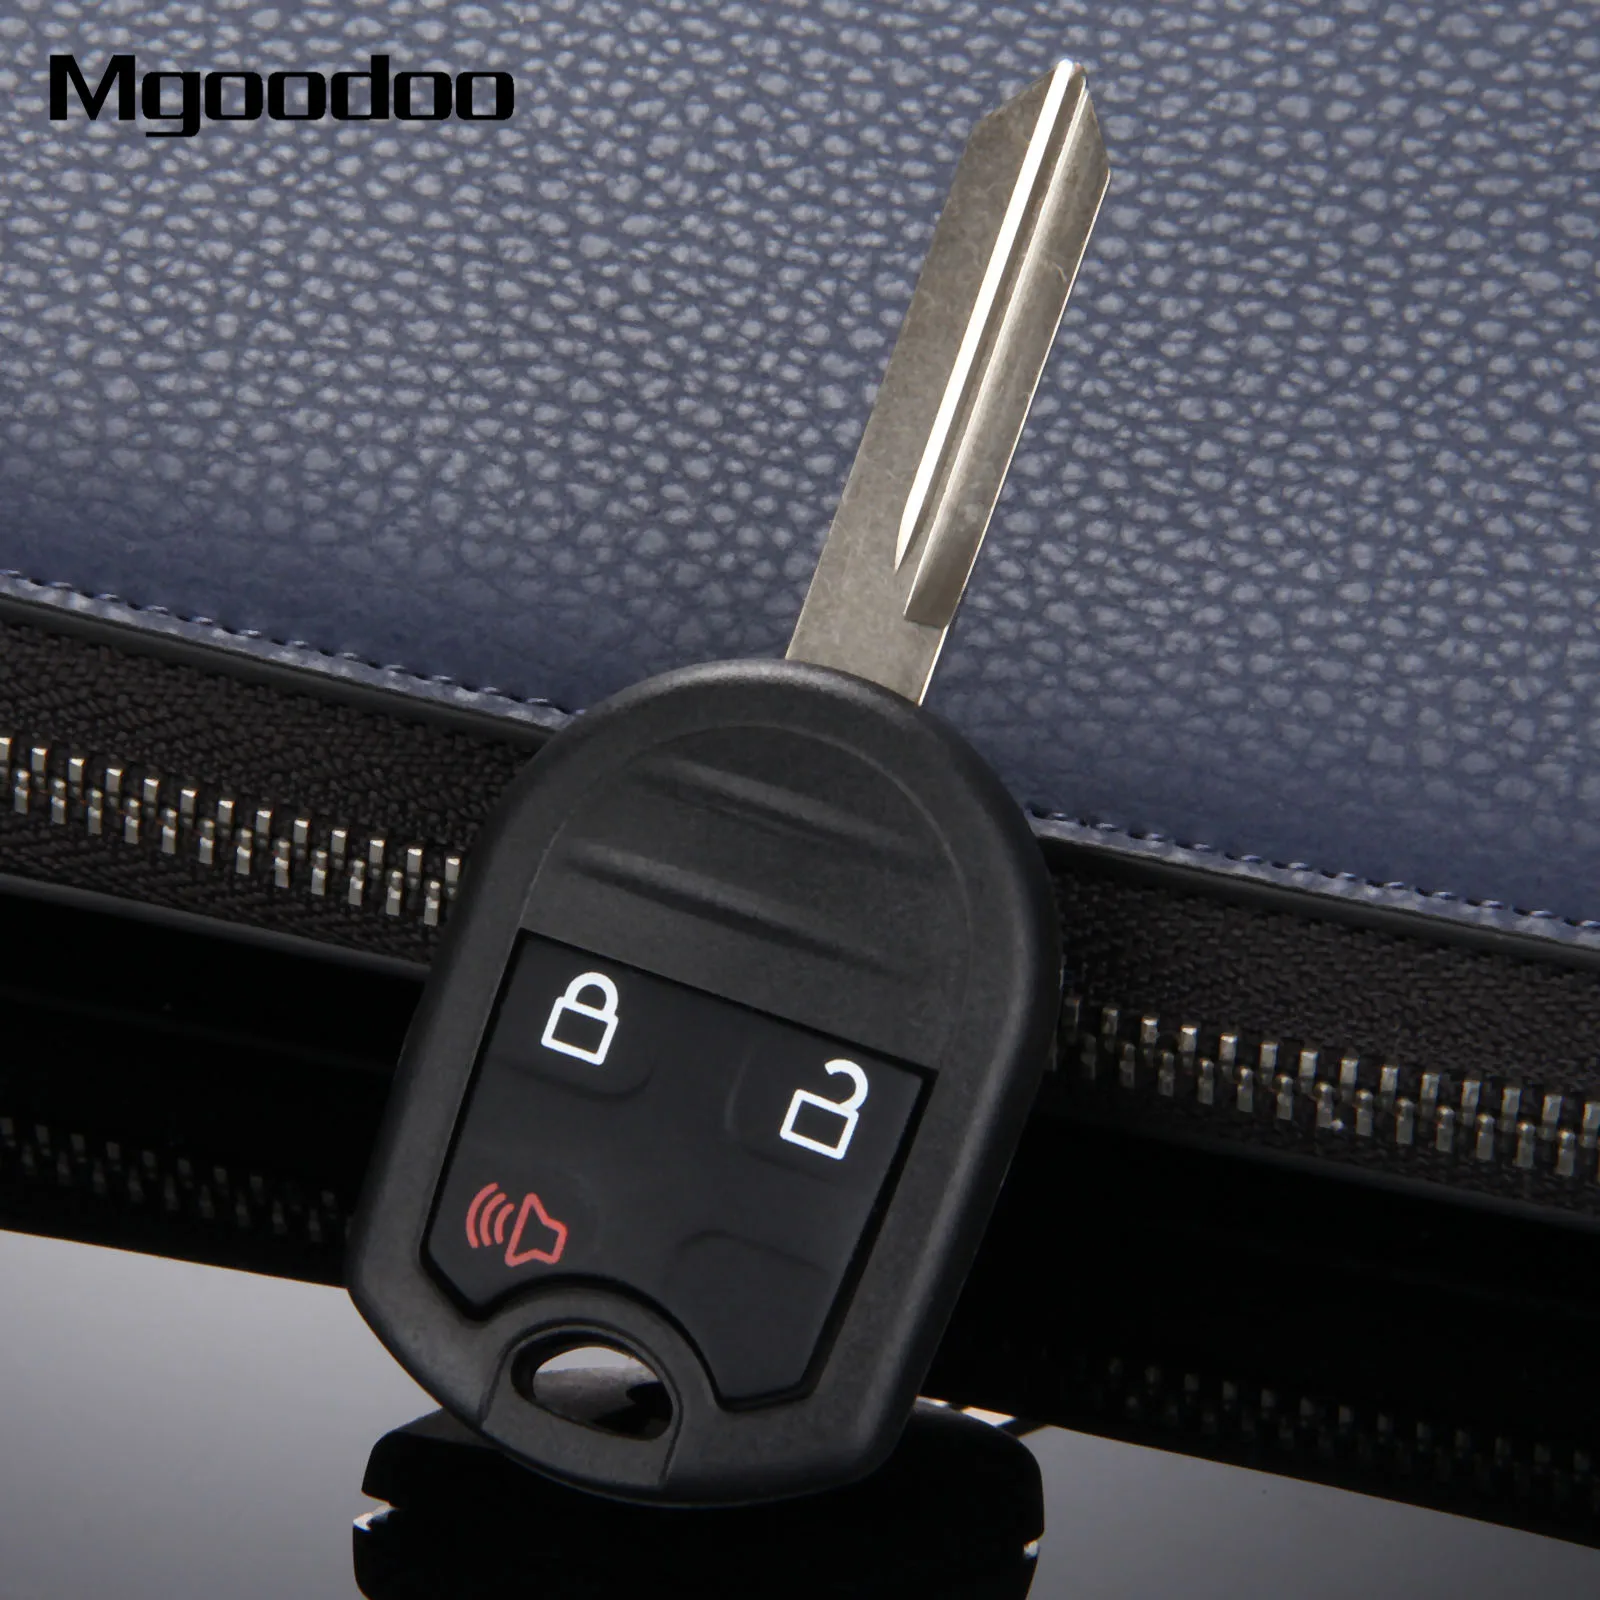 

3 Button Car Replacement Remote Key Shell Case Cover Fob Entry For Ford Edge Explorer Flex Focus Taurus Escape Expedition Fusion